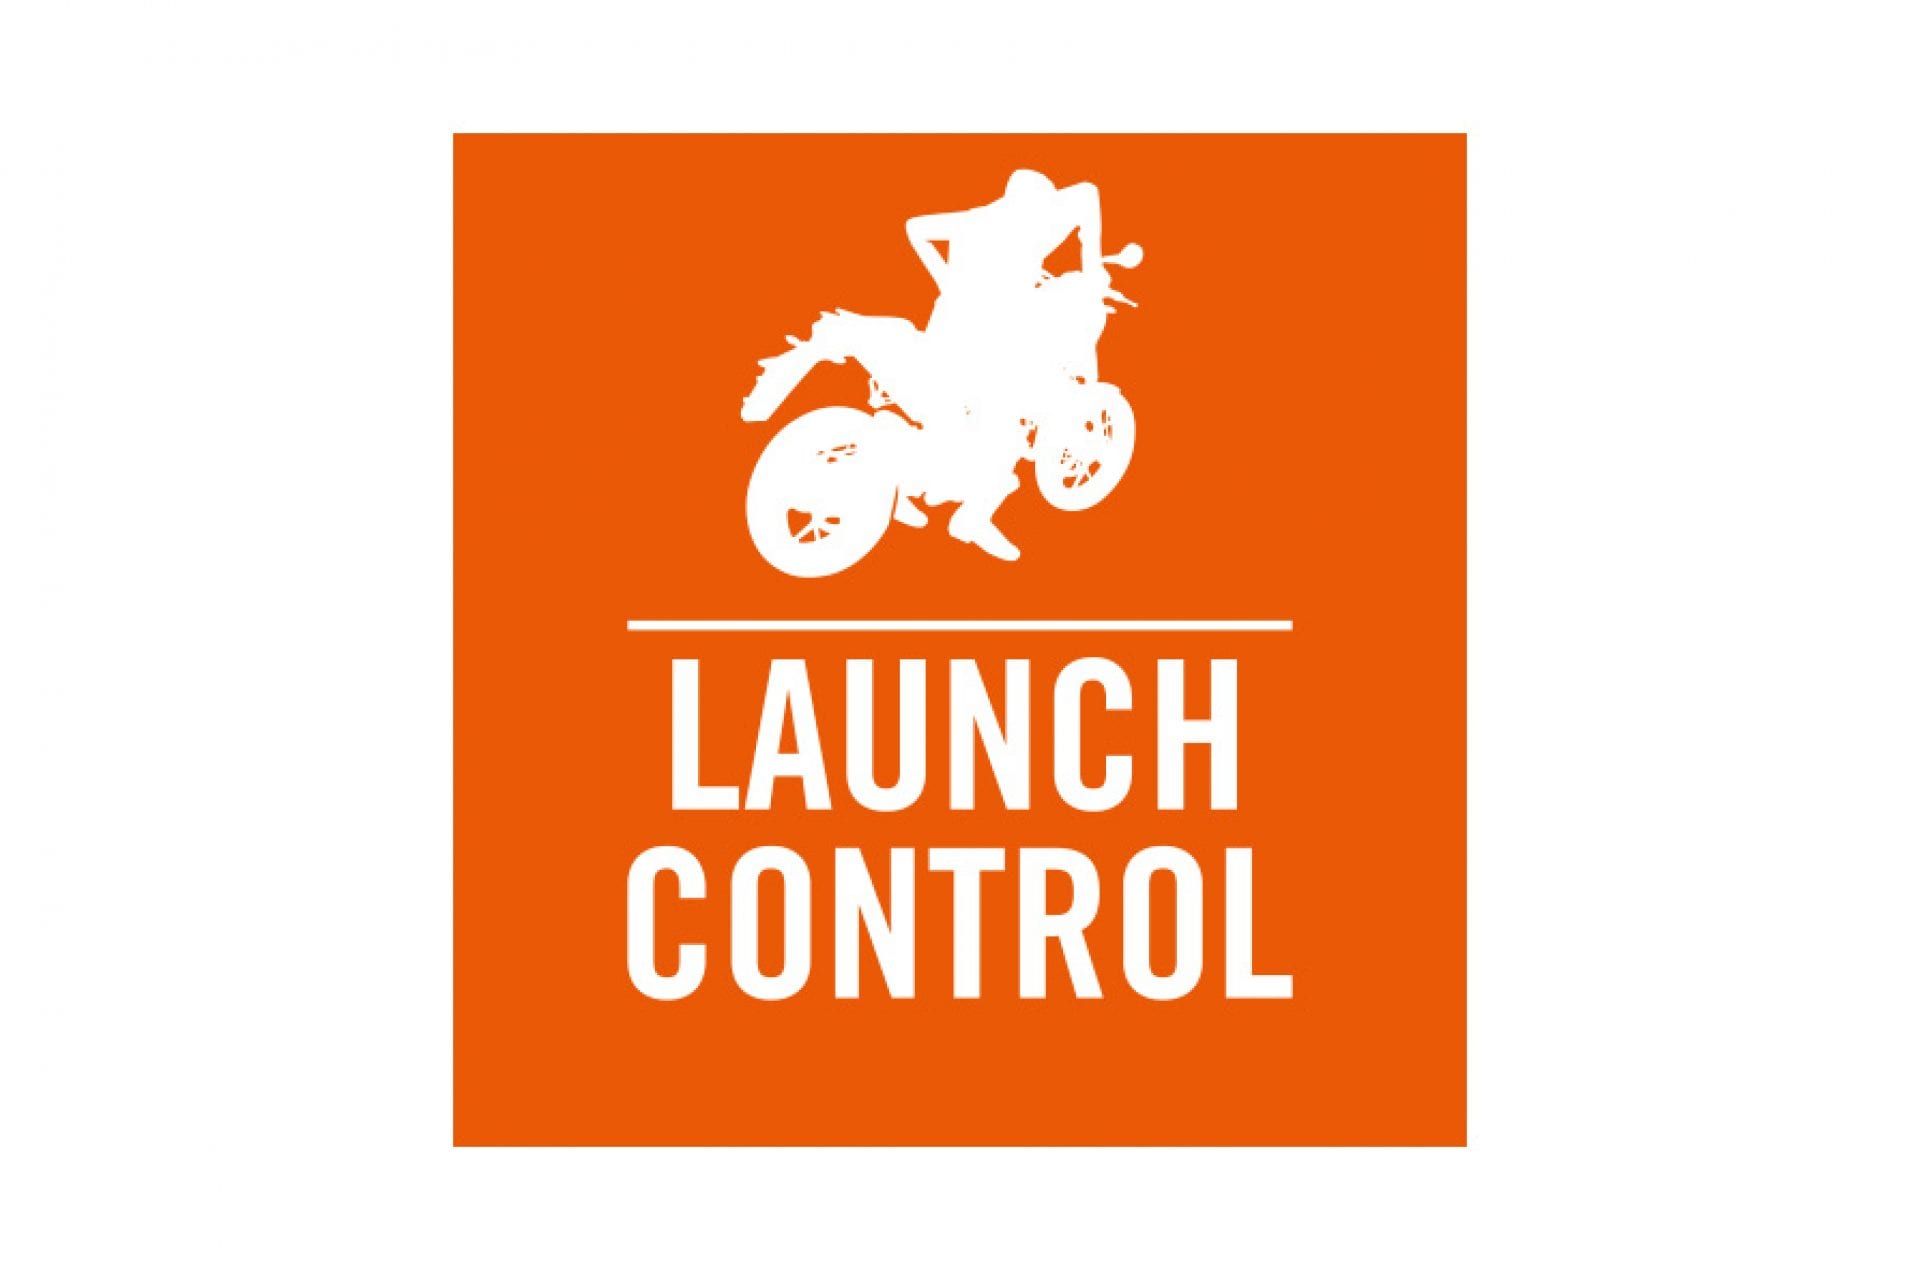 LAUNCH CONTROL